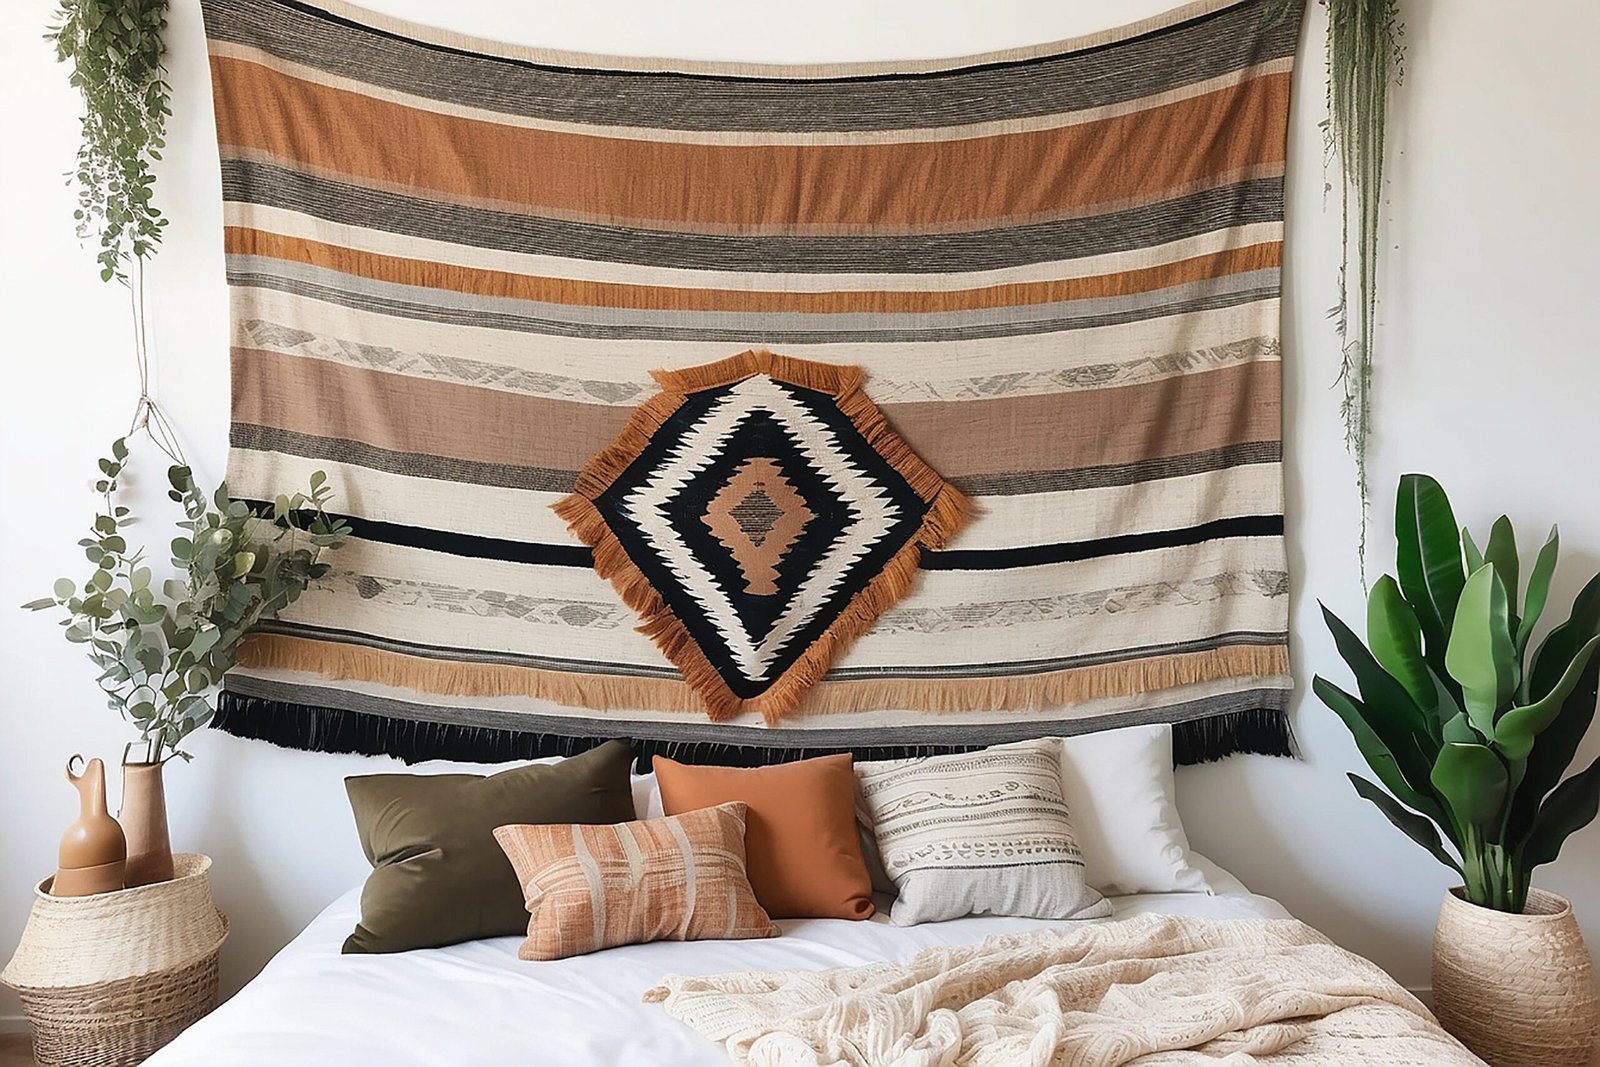 Boho Woven Wall Tapestry with Earthy Tones.